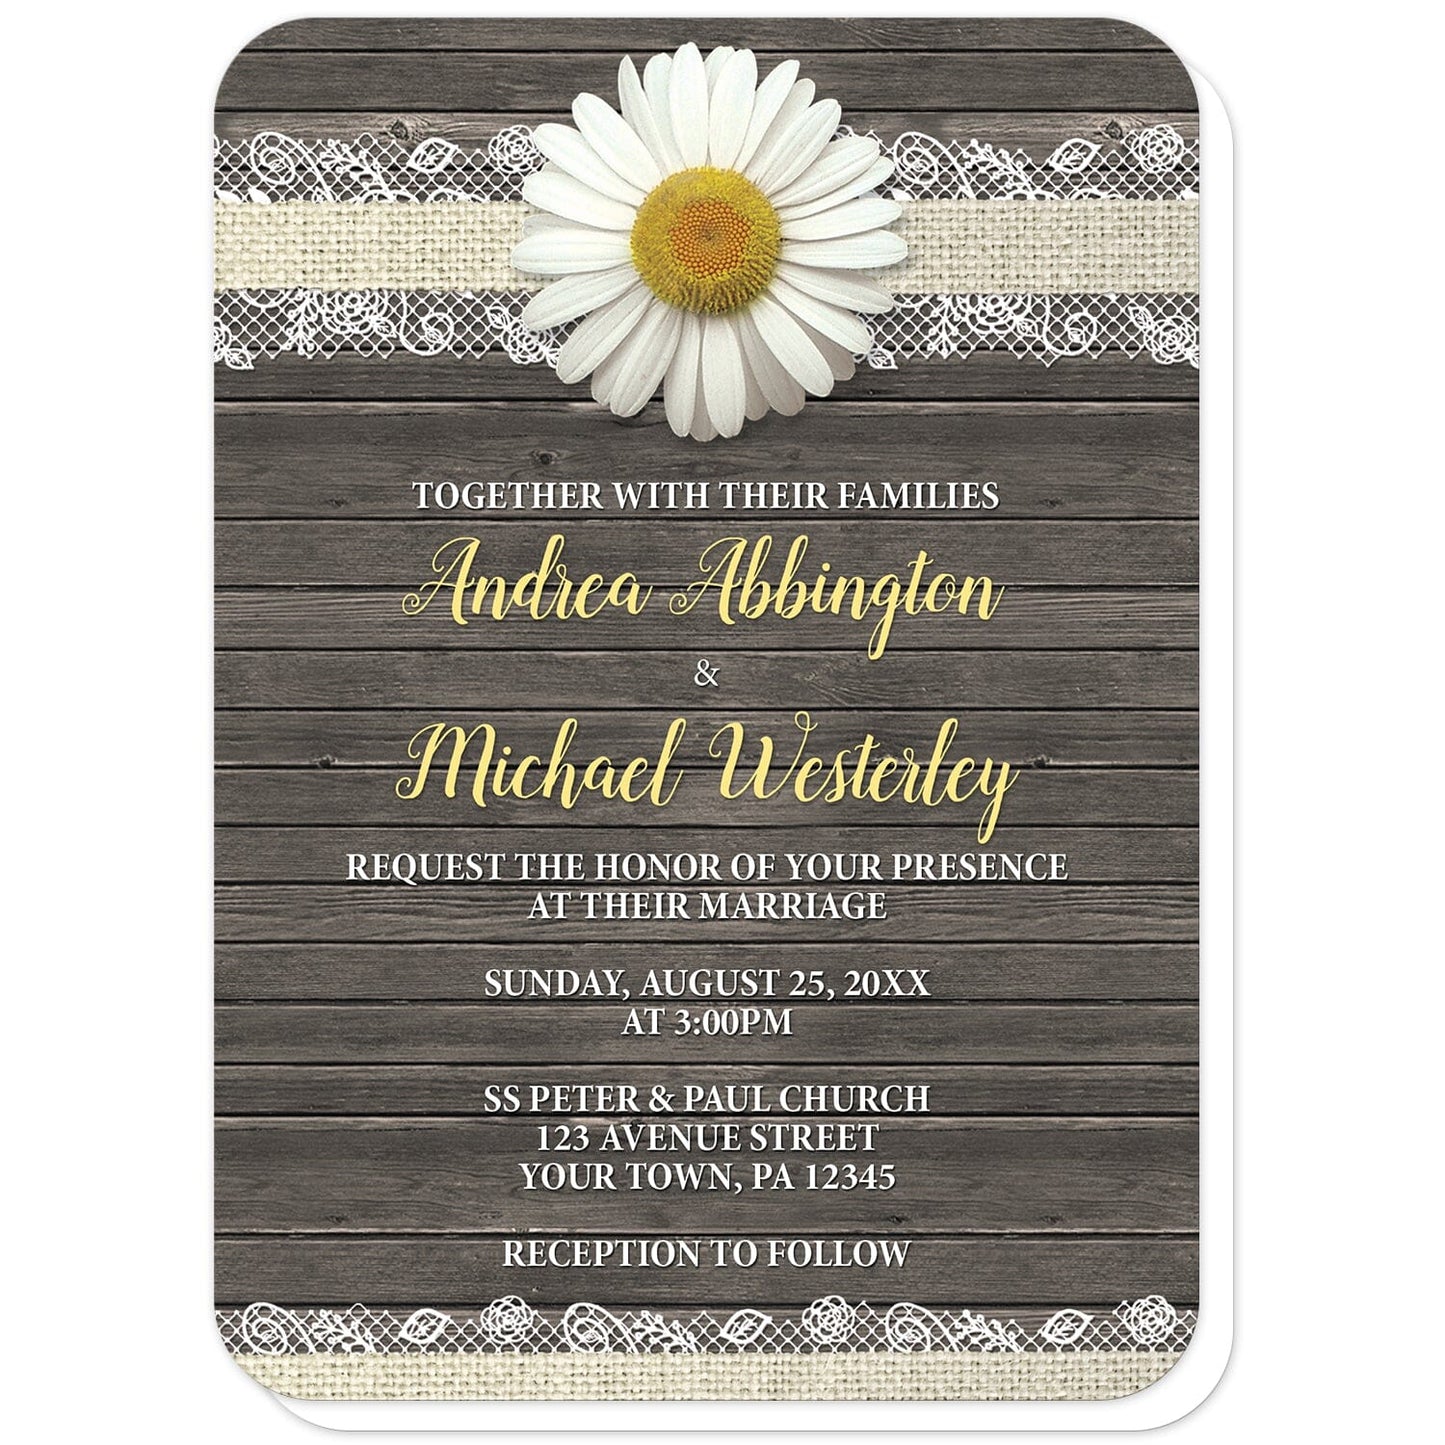 Daisy Burlap and Lace Wood Wedding Invitations (with rounded corners) at Artistically Invited. Southern rustic daisy burlap and lace wood wedding invitations with a white daisy flower centered at the top on a burlap and lace ribbon strip illustration, over a brown country wood background. Your personalized marriage celebration details are custom printed in yellow and white over the wood design.